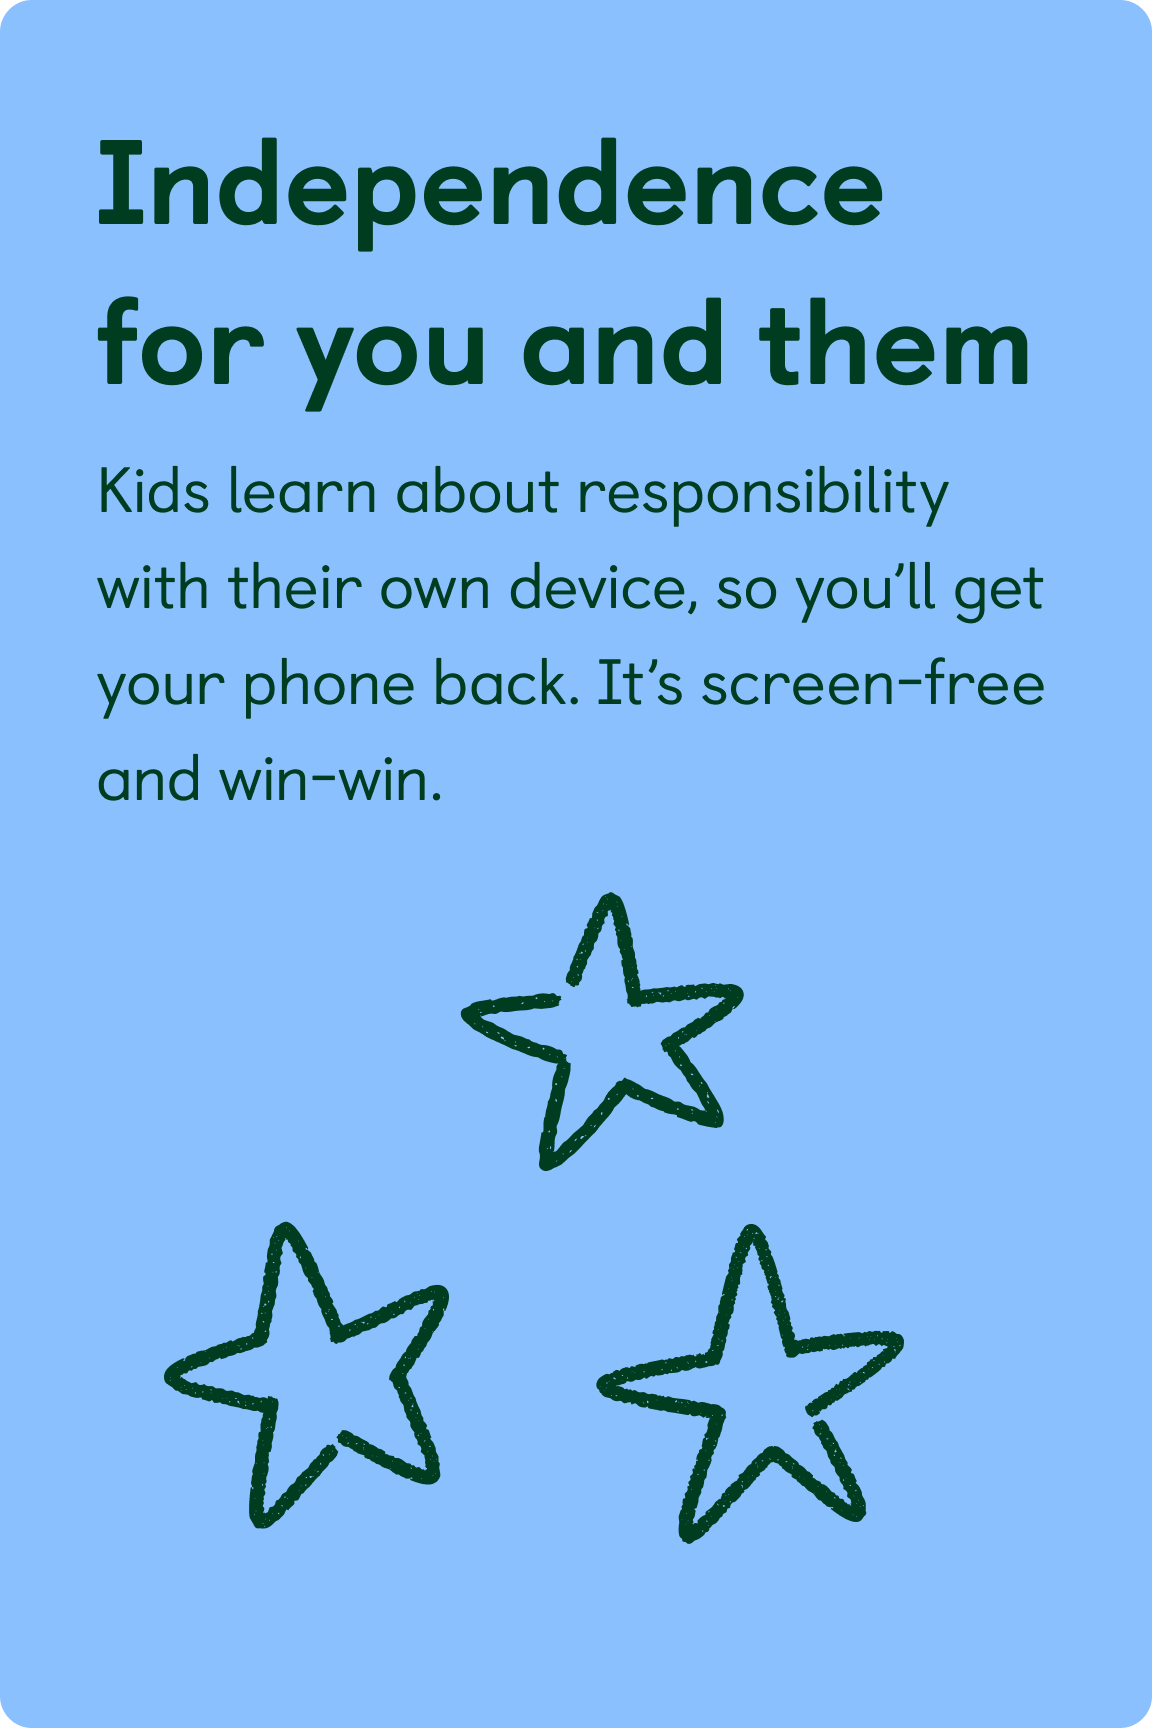 Independence for you and them. Kids learn about responsibility with their own device, so you’ll get your phone back. It’s screen-free and win-win.